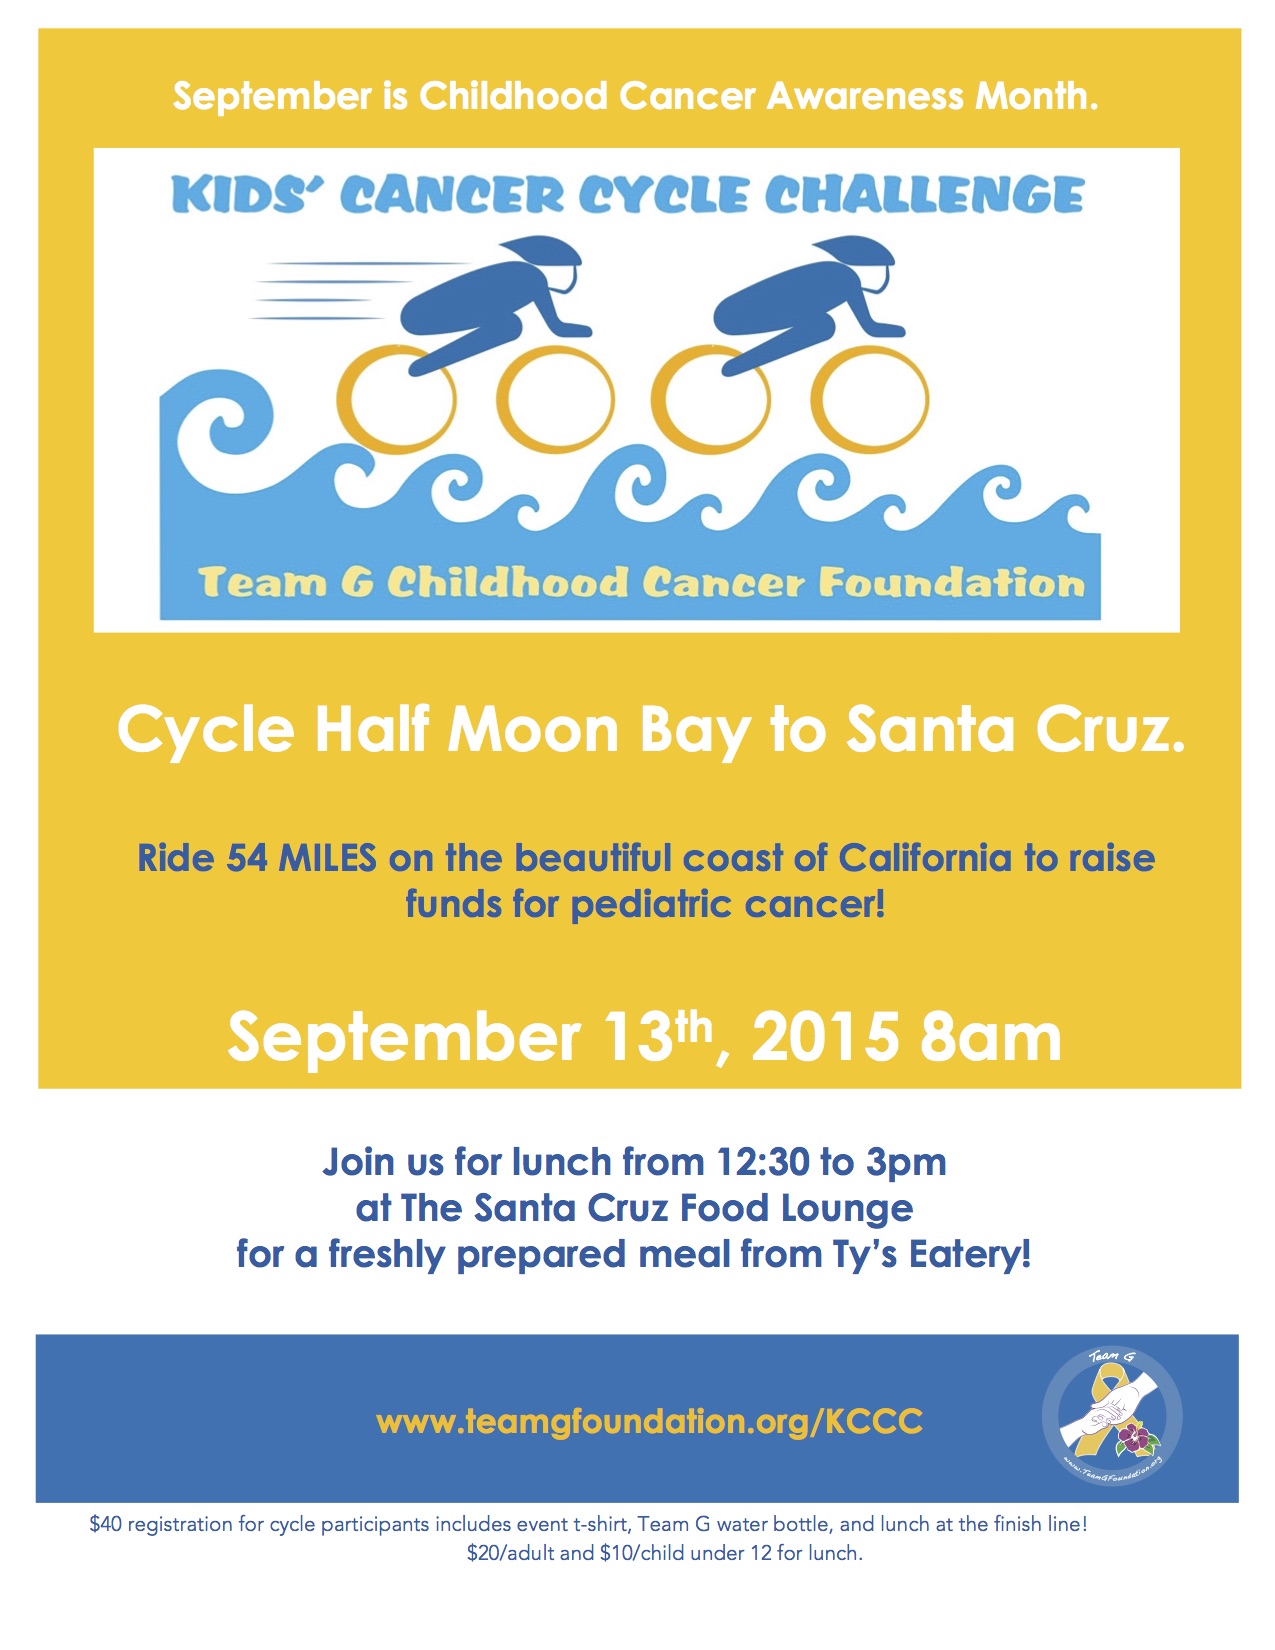 Kids’ Cancer Cycle Challenge